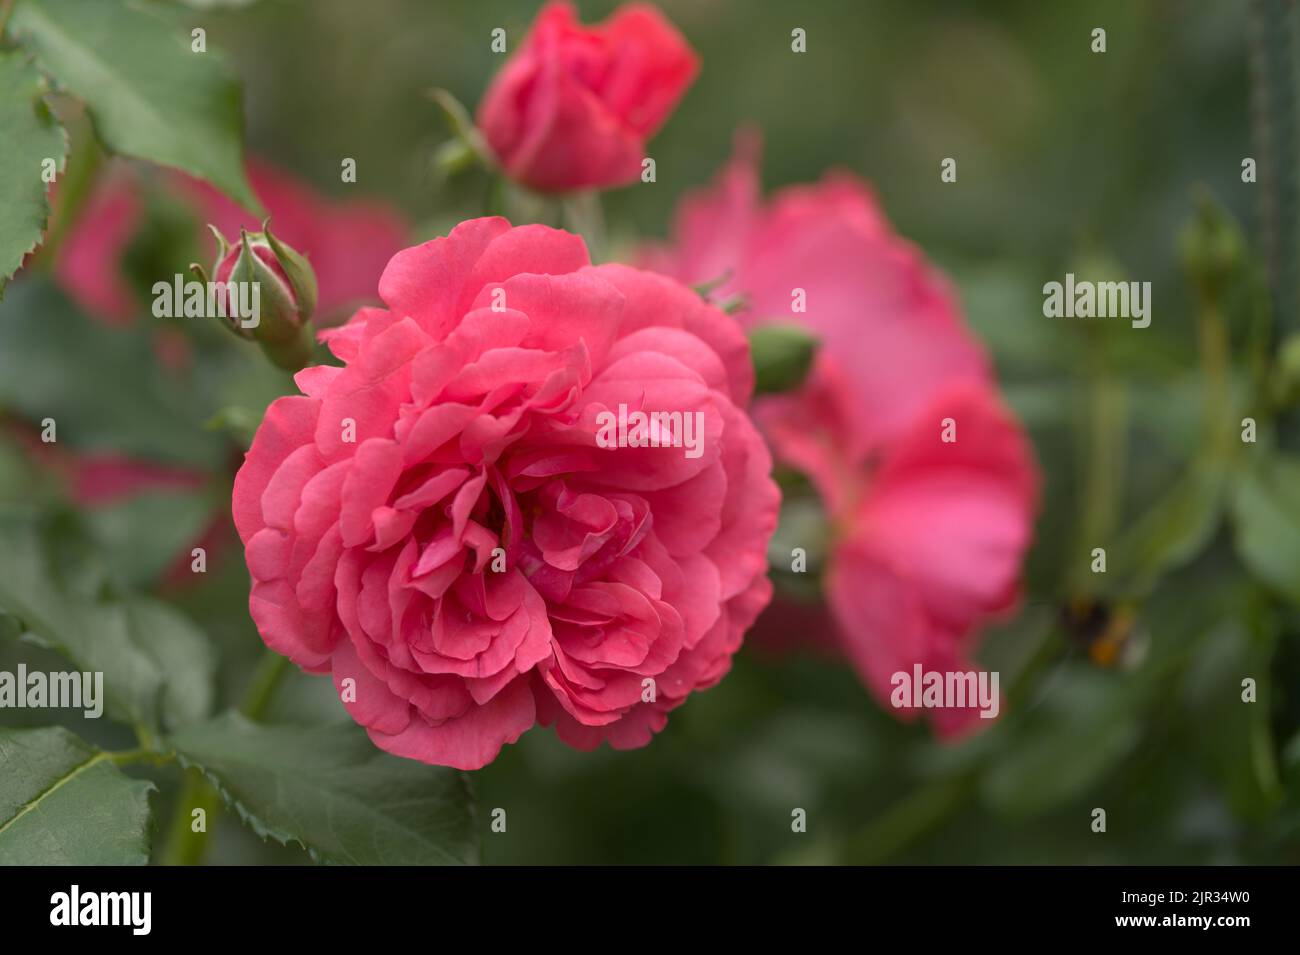 Red rose flowers in a garden Stock Photo